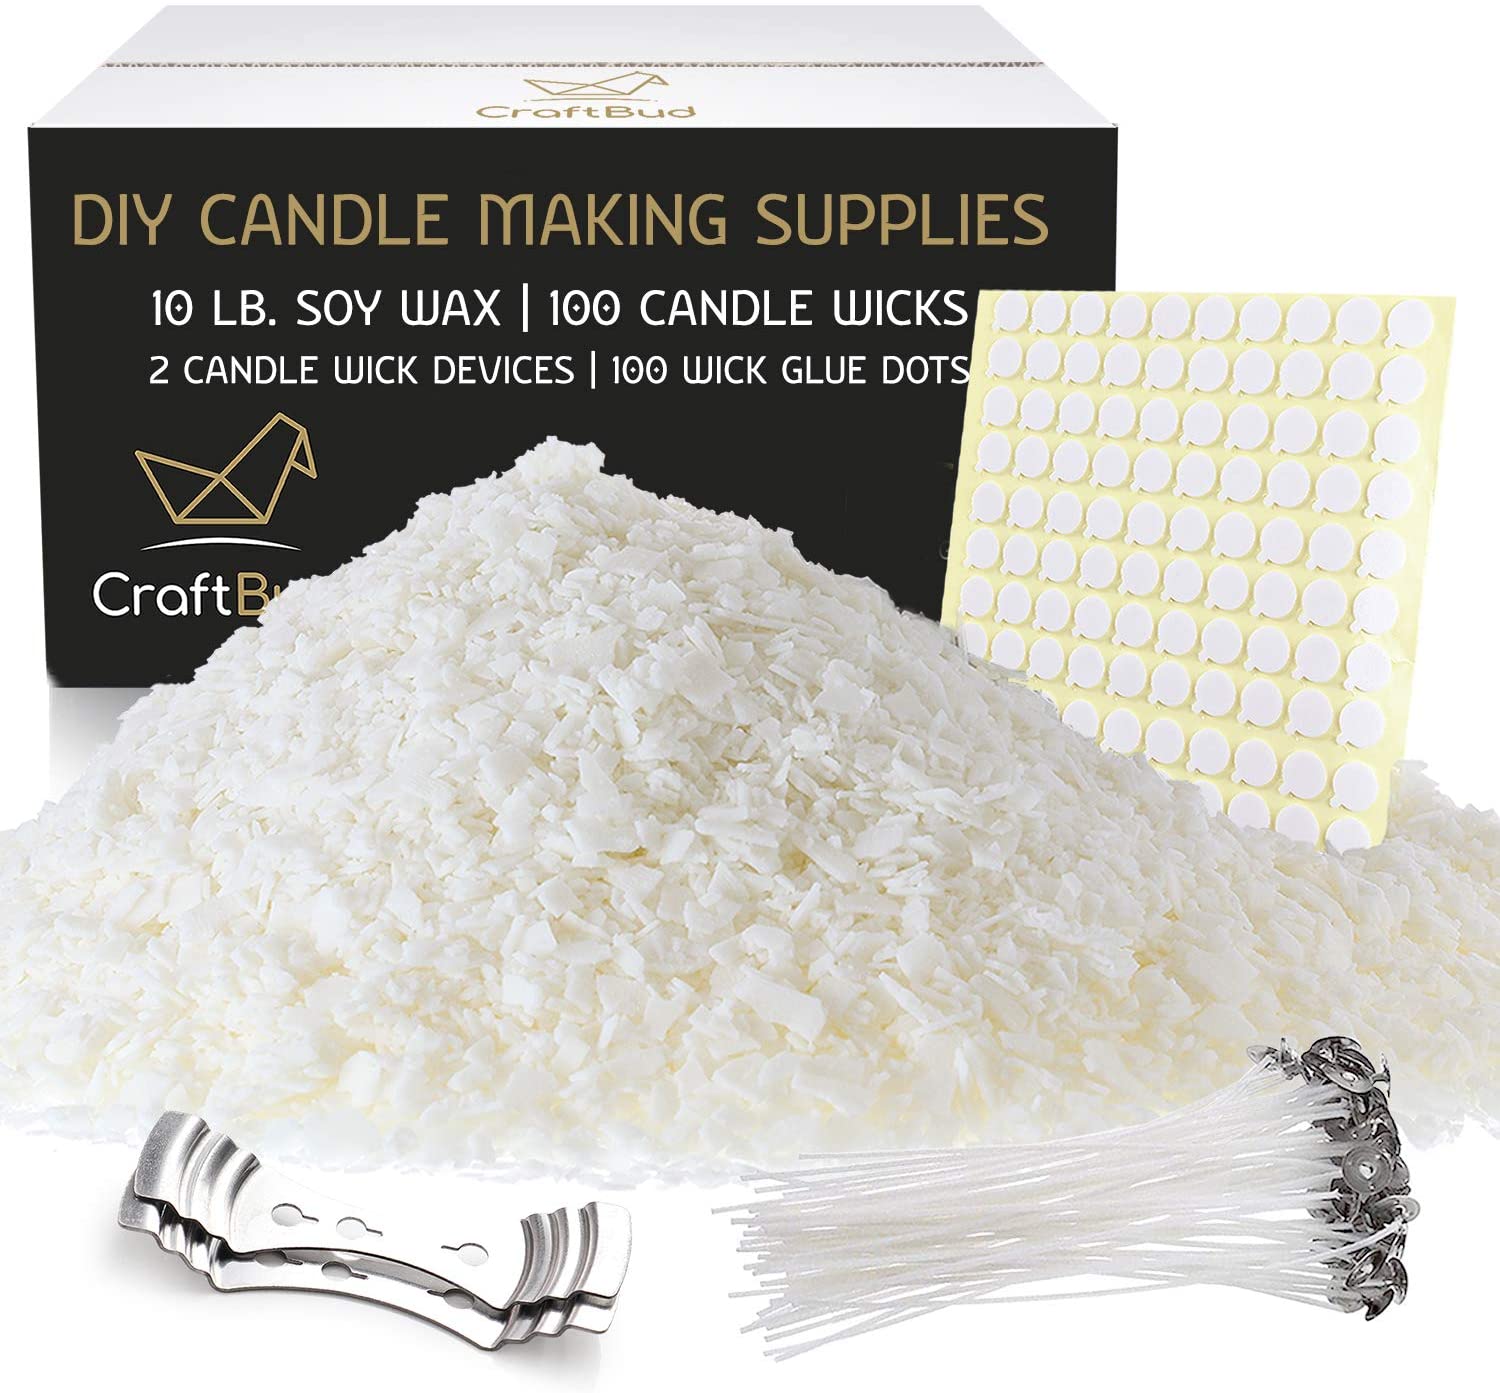  Hearth & Harbor Soy Candle Wax for Candle Making - Natural Soy  Wax for Candle Making 2 lb Bag, Premium Soy Wax Flakes, 5 Cotton Candle  Wicks, 4 Wick Stickers, & 1 Centering Devices